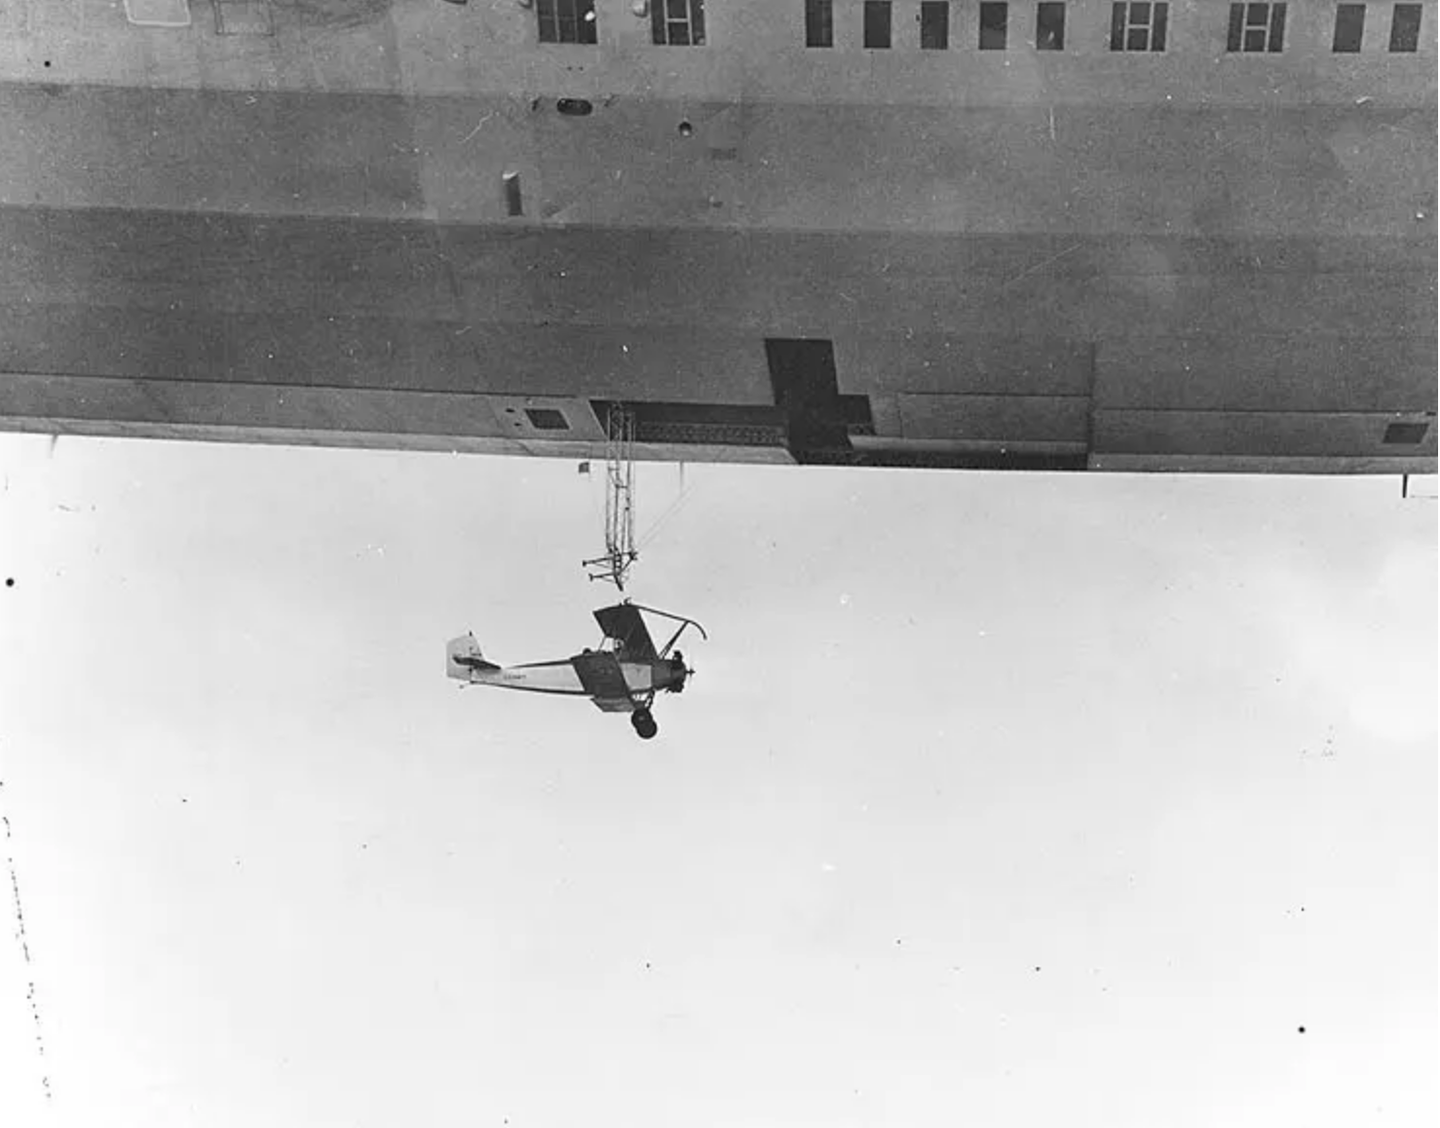 USS Akron (ZRS-4) Launches a Consolidated N2Y-1 training plane (Bureau # A8604) during flight tests near Naval Air Station Lakehurst, New Jersey, 4 May 1932. (U.S. Navy)